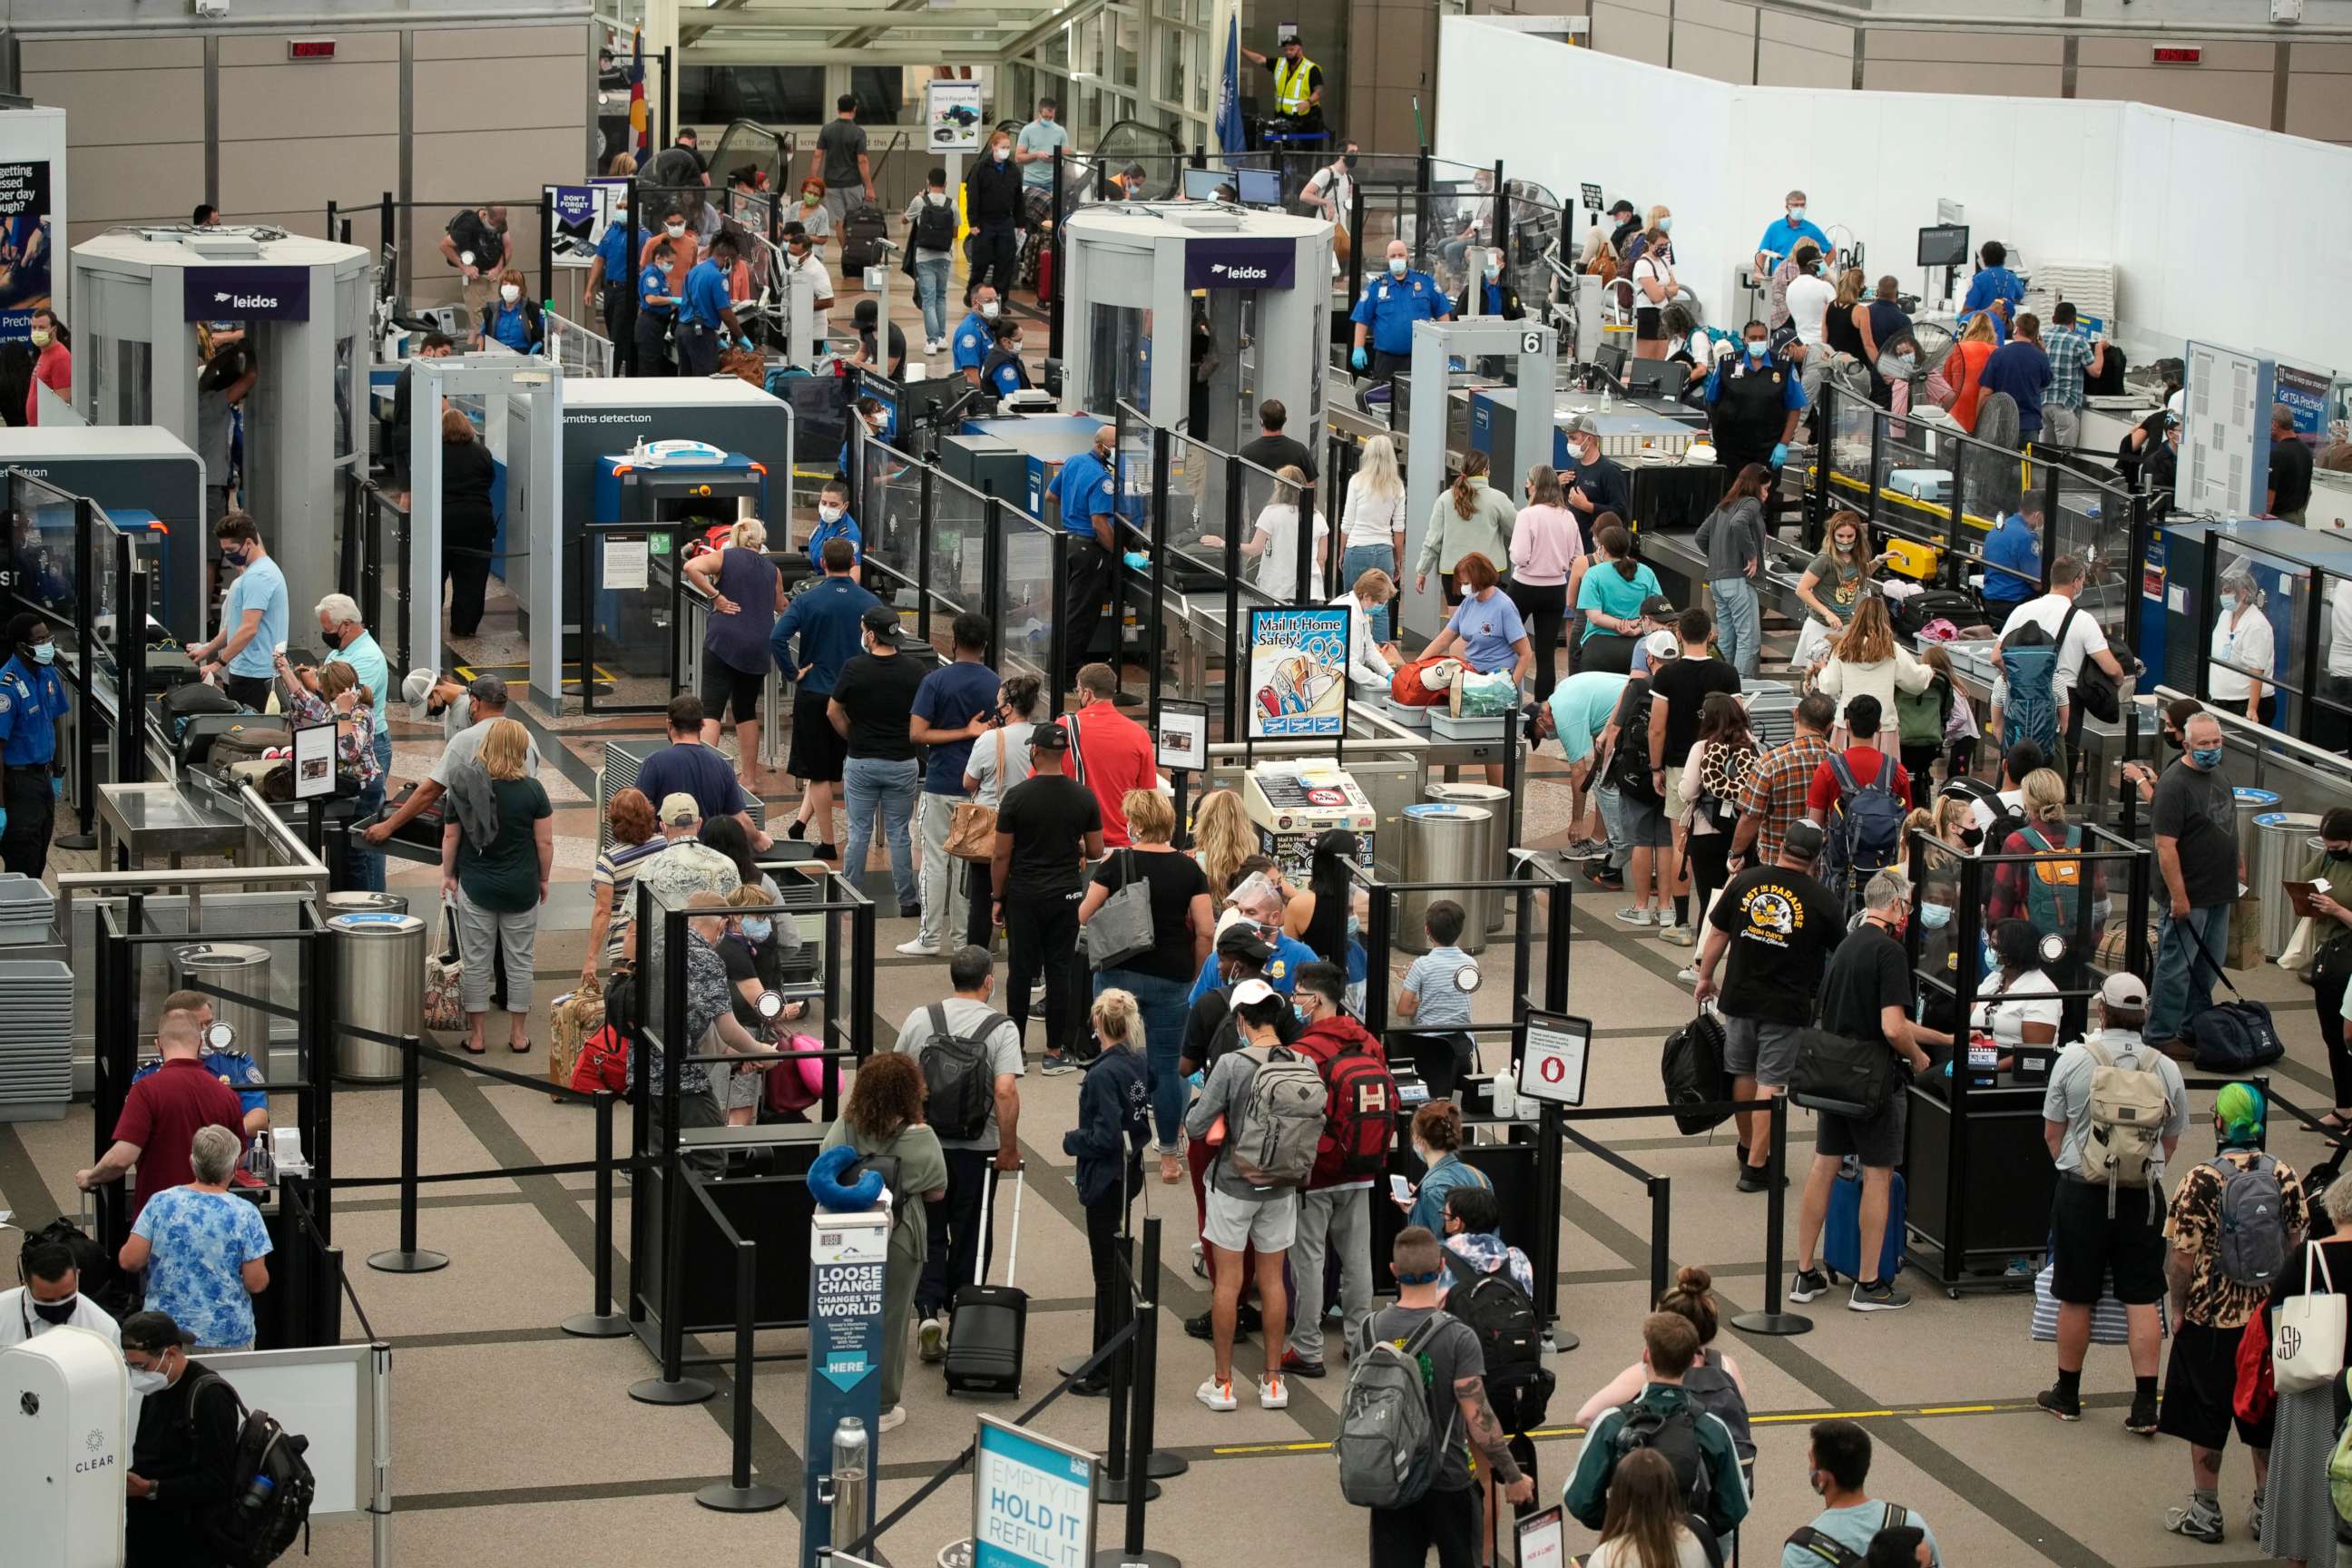 PHOTO: Travelers wear face coverings while in line at the security checkpoint in the main terminal of Denver International Airport, Aug. 24, 2021, in Denver.